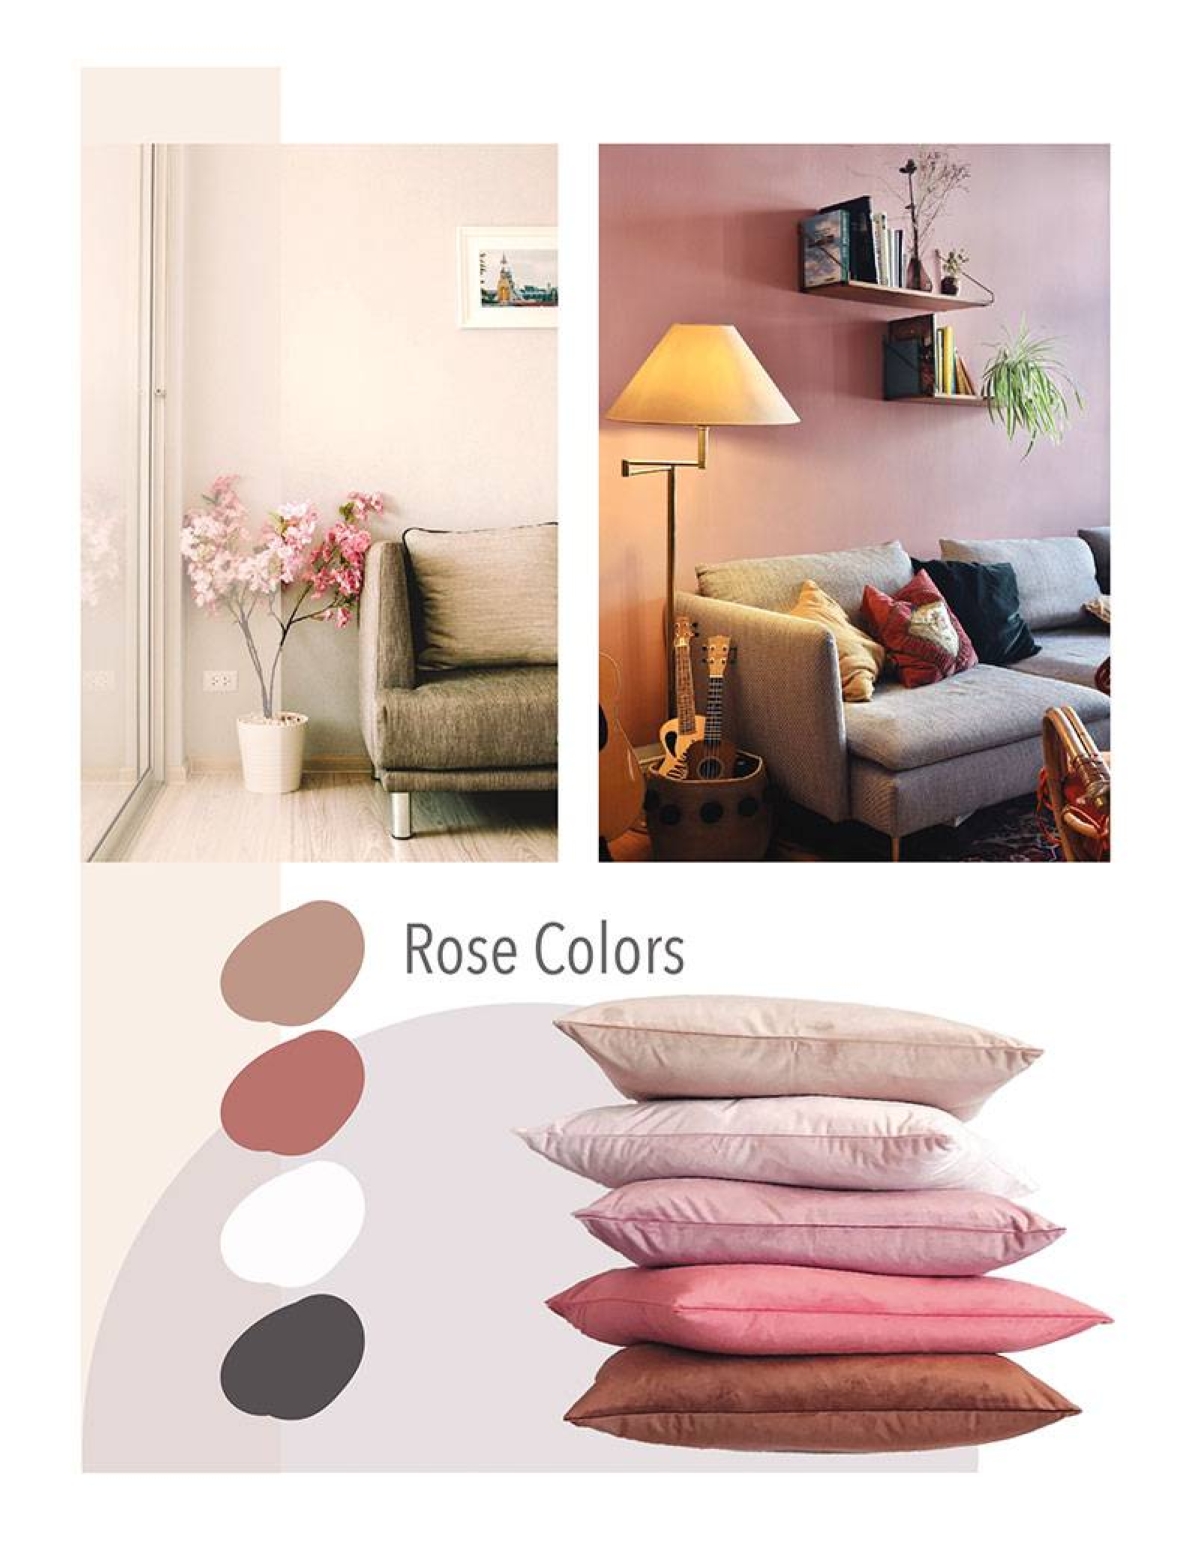 colors uplift mood, spaces